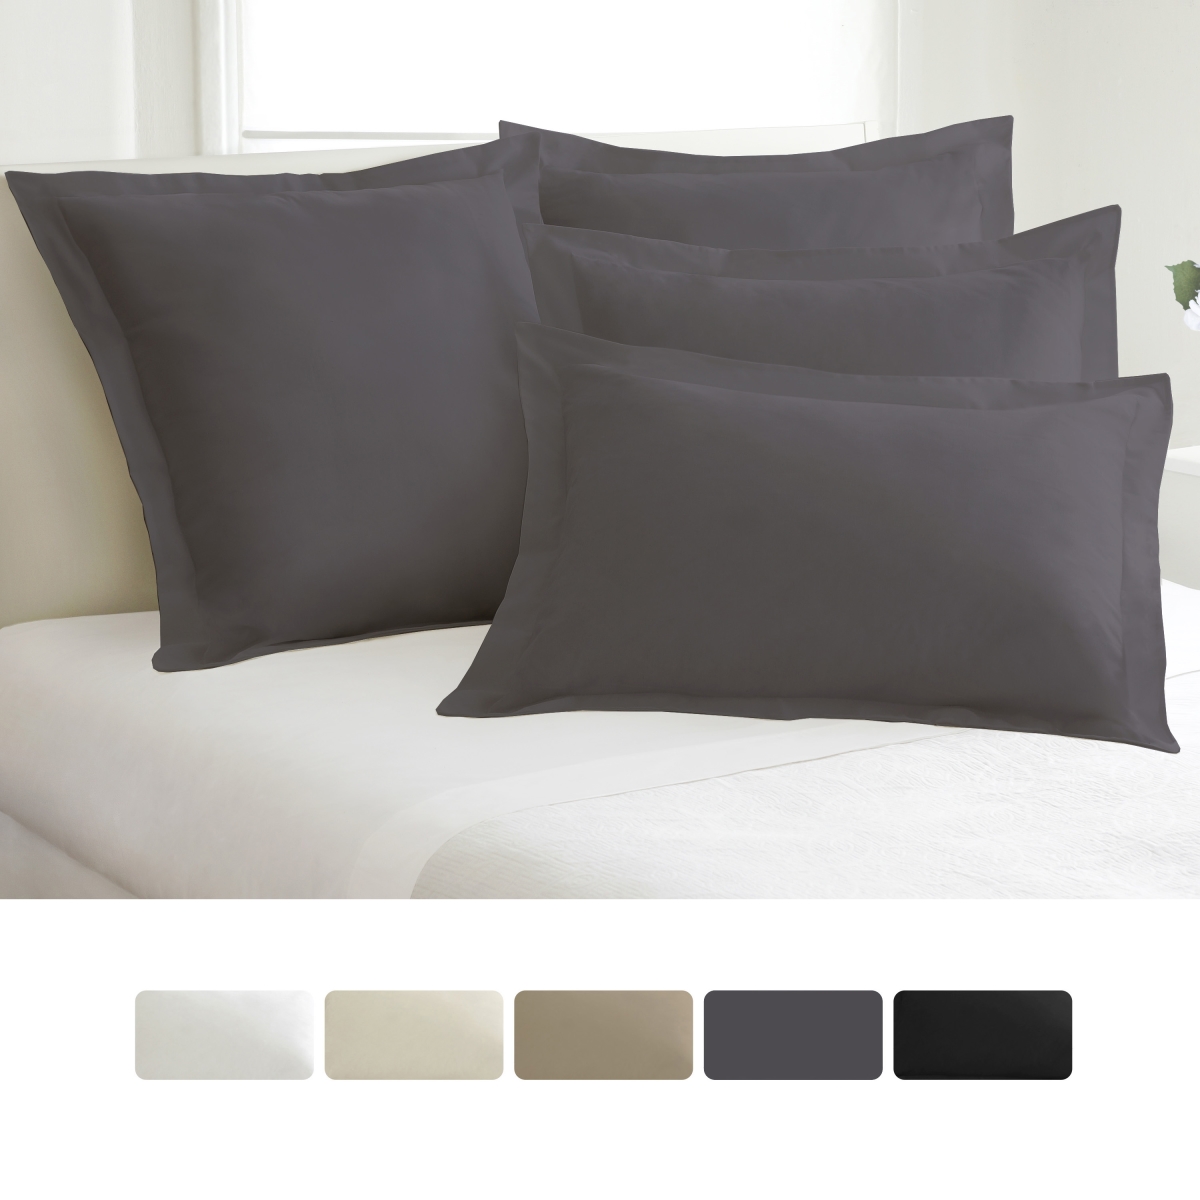 Toh24902grey07 Levinsohn Basic Cotton Rich Tailored Sham With 2 In. Flange Grey - Standard - Pack Of 2